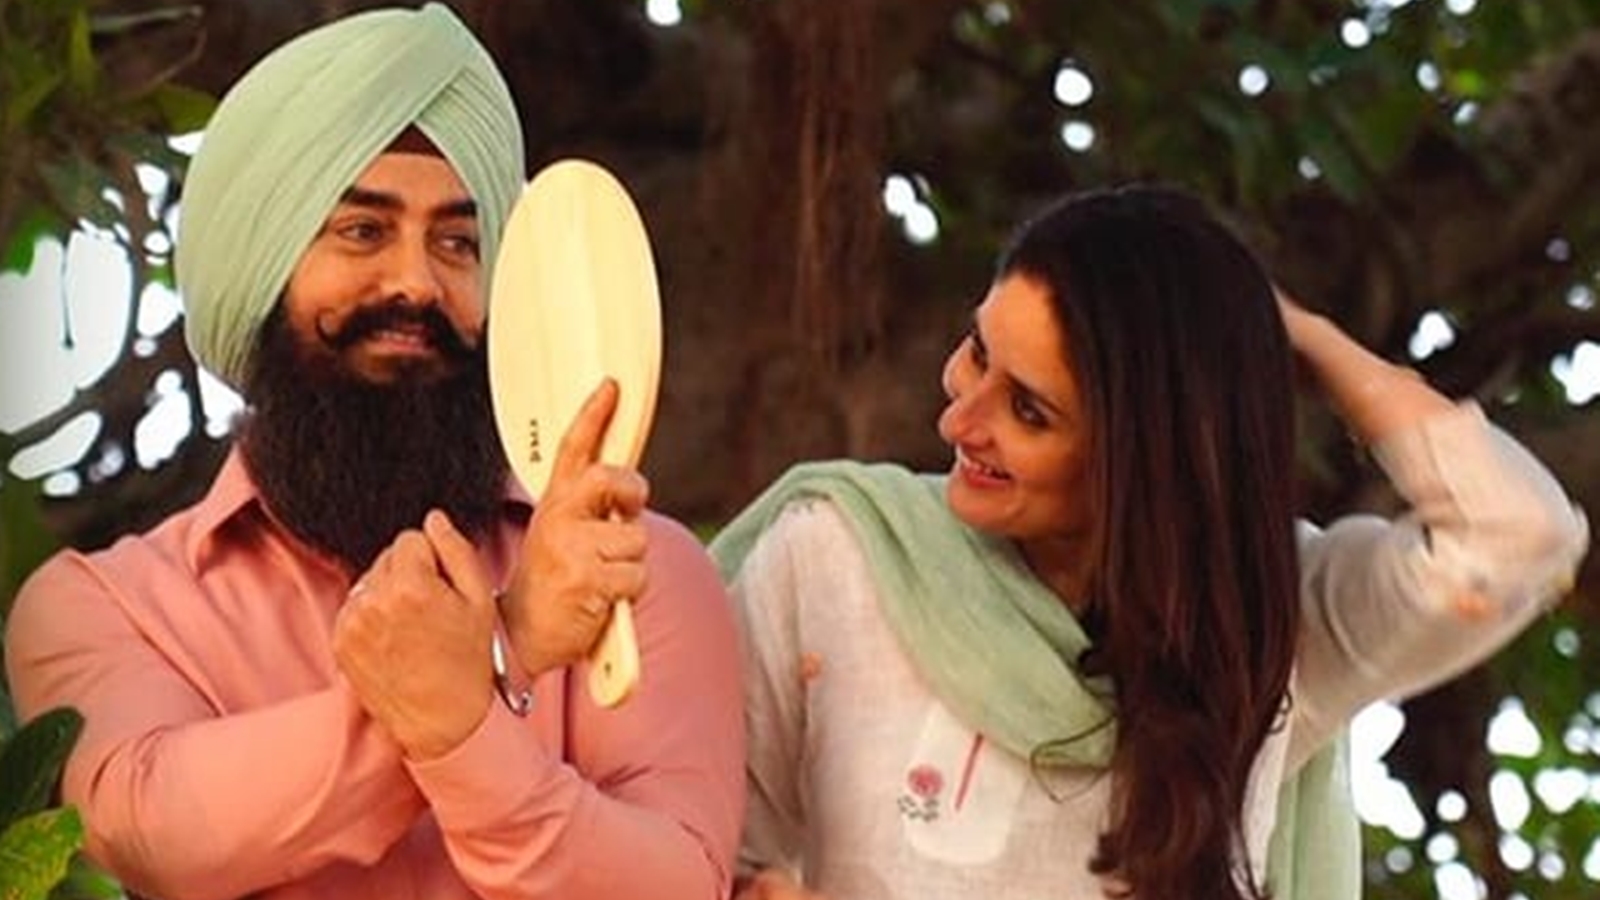 Laal Singh Chaddha has already been declared a flop domestically